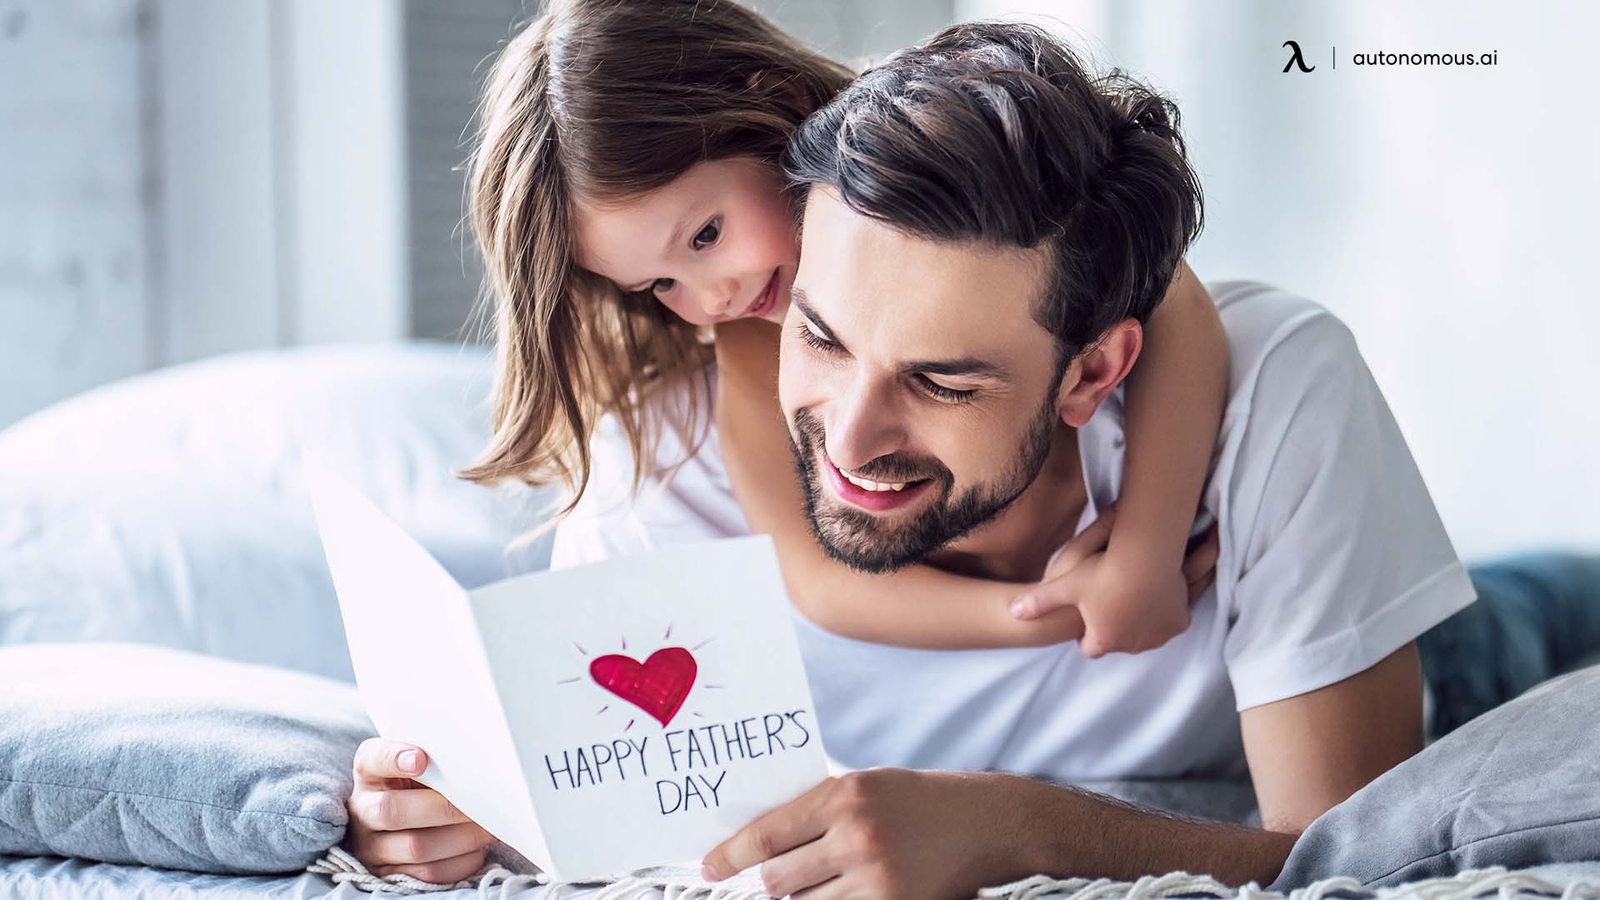 Top 5 Unique Father's Day Gifts to Win His Heart for 2023